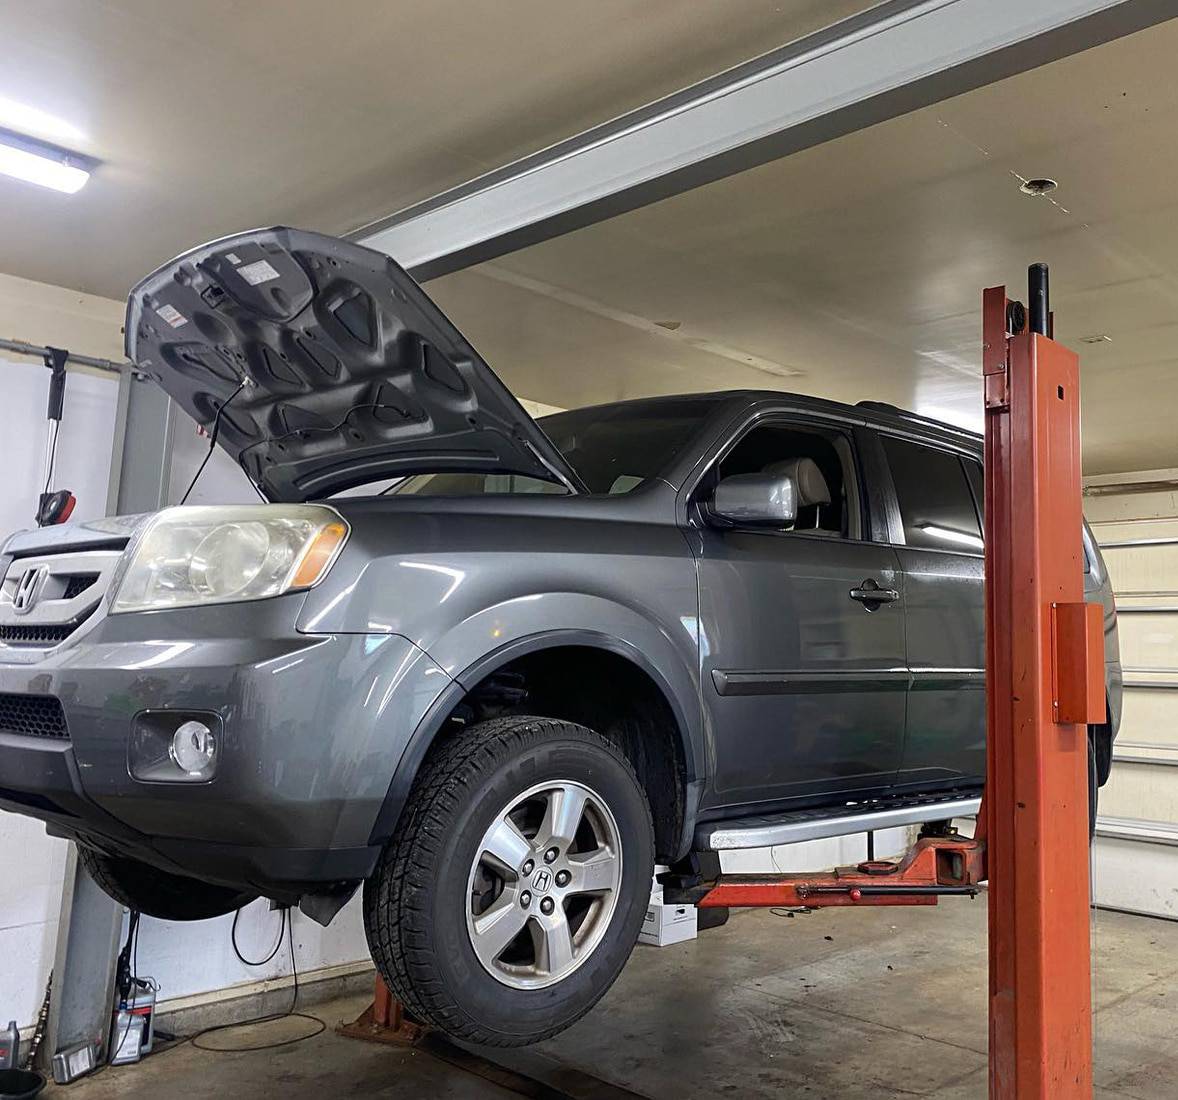 Japanese Auto Repair in Pataskala, OH | Honda & Acura Specialists | Enright Automotive. Image of gray honda piolet on shop lift with hood open for repairs.